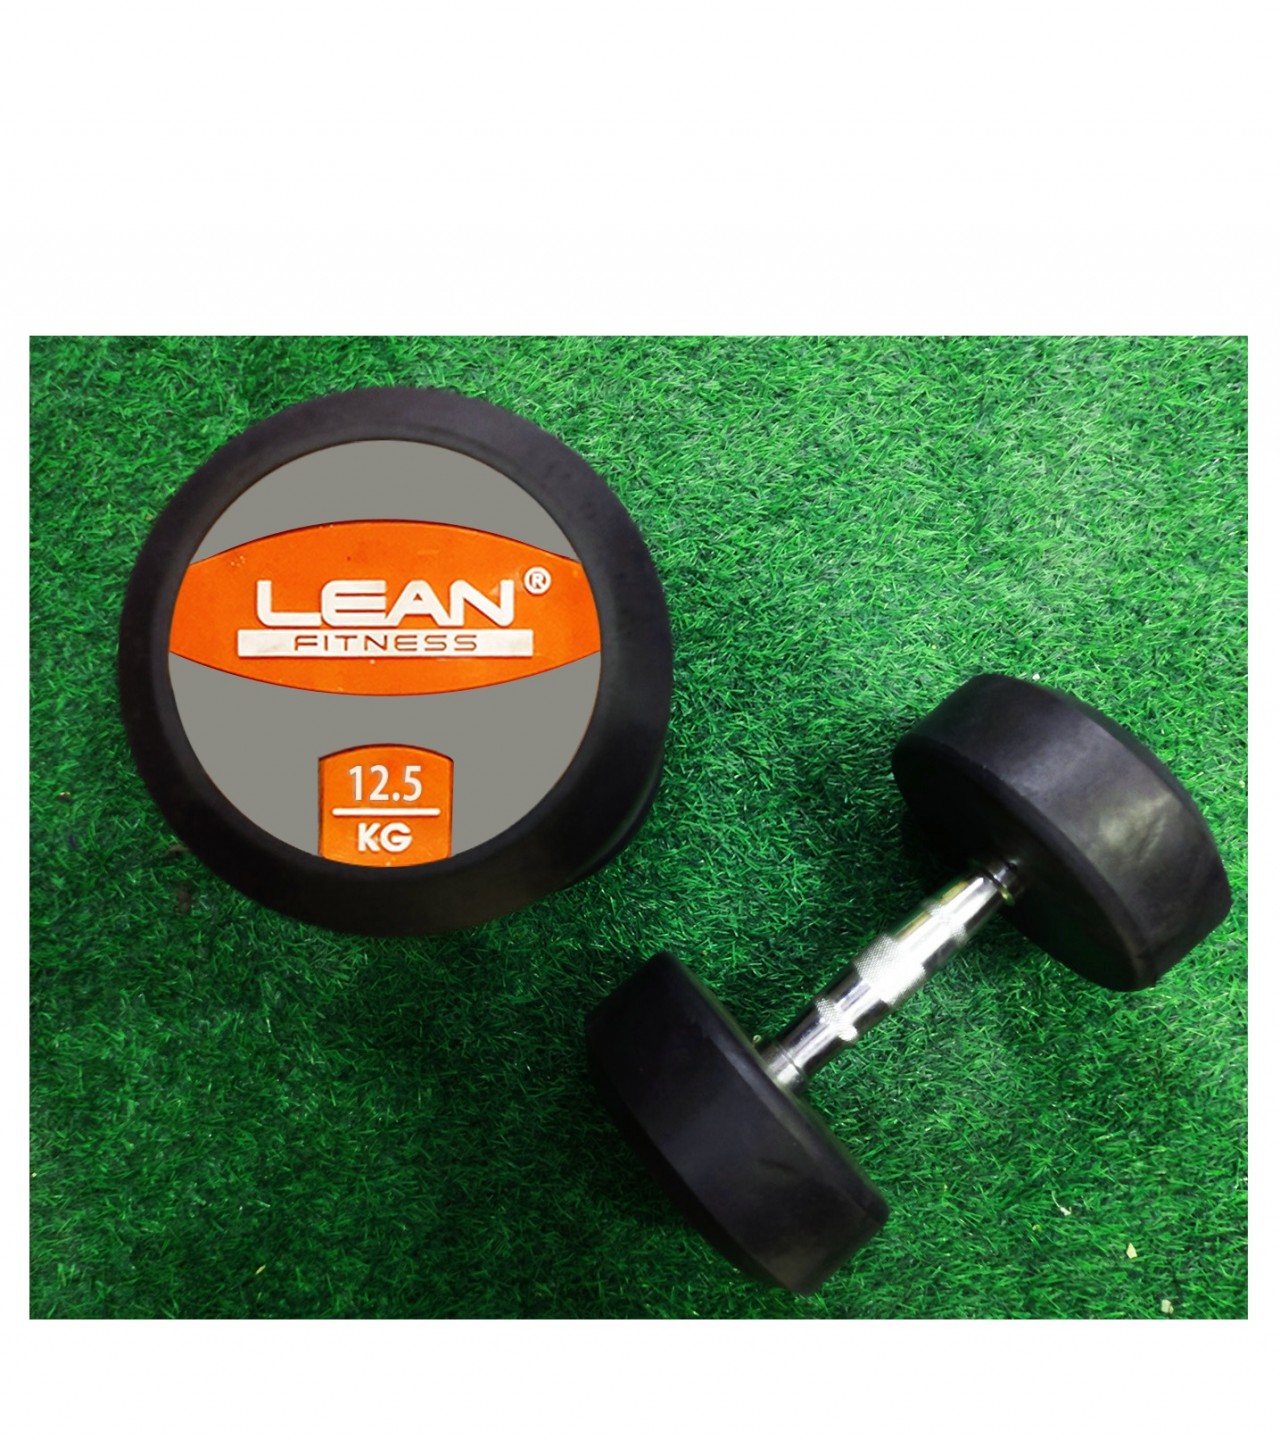 25 kg Lean Fitness Rubber Dumbbell Pairs